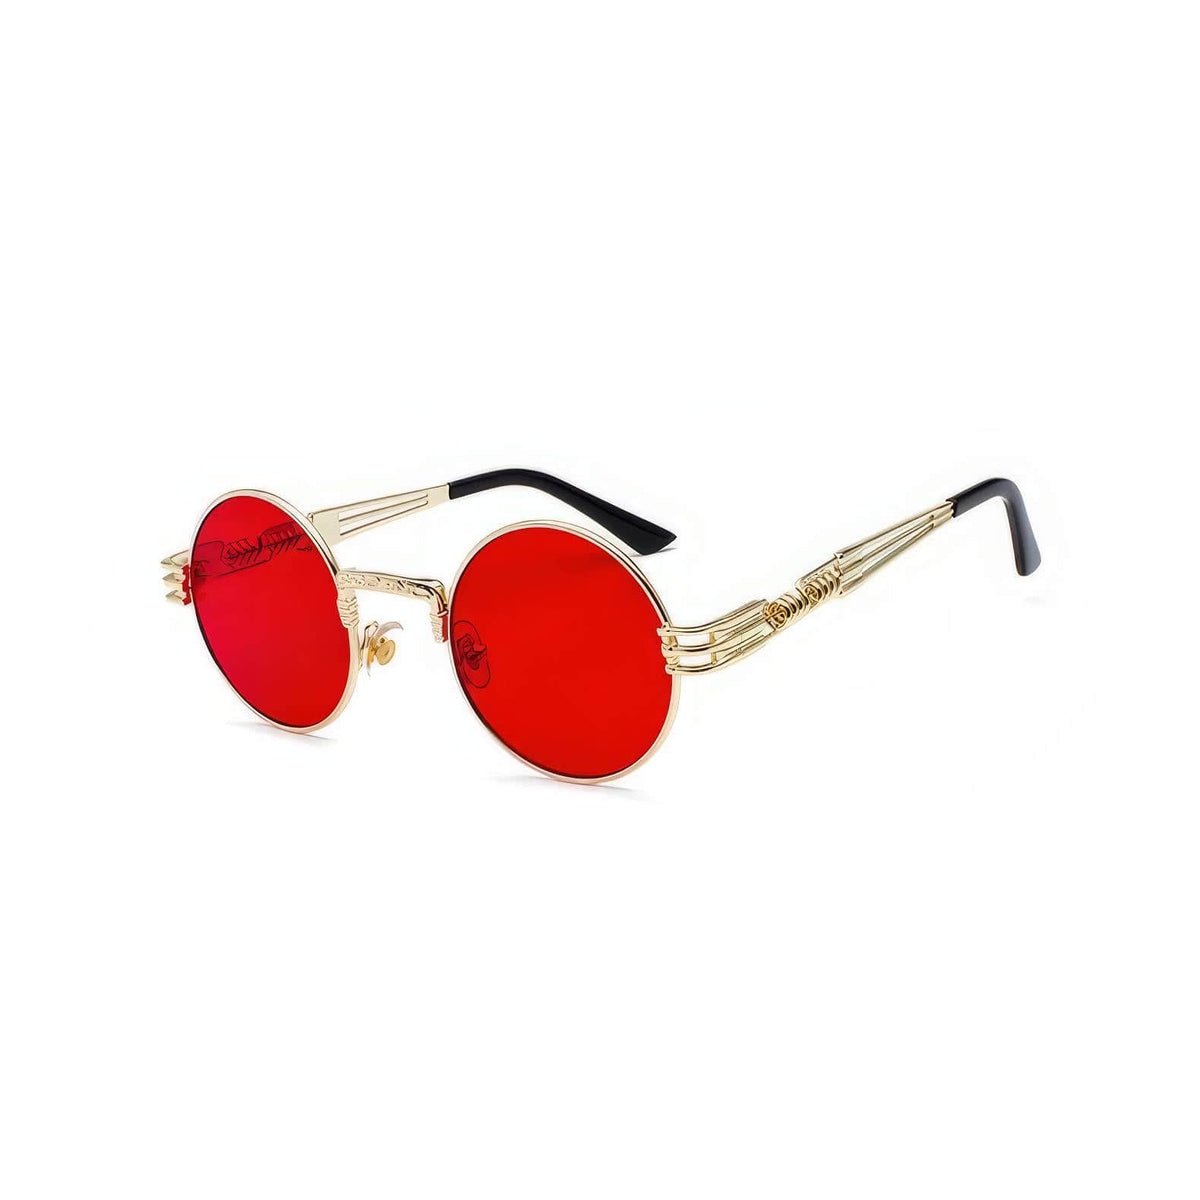 Mirror Lens Round Sunglasses Red/Gold / Resin